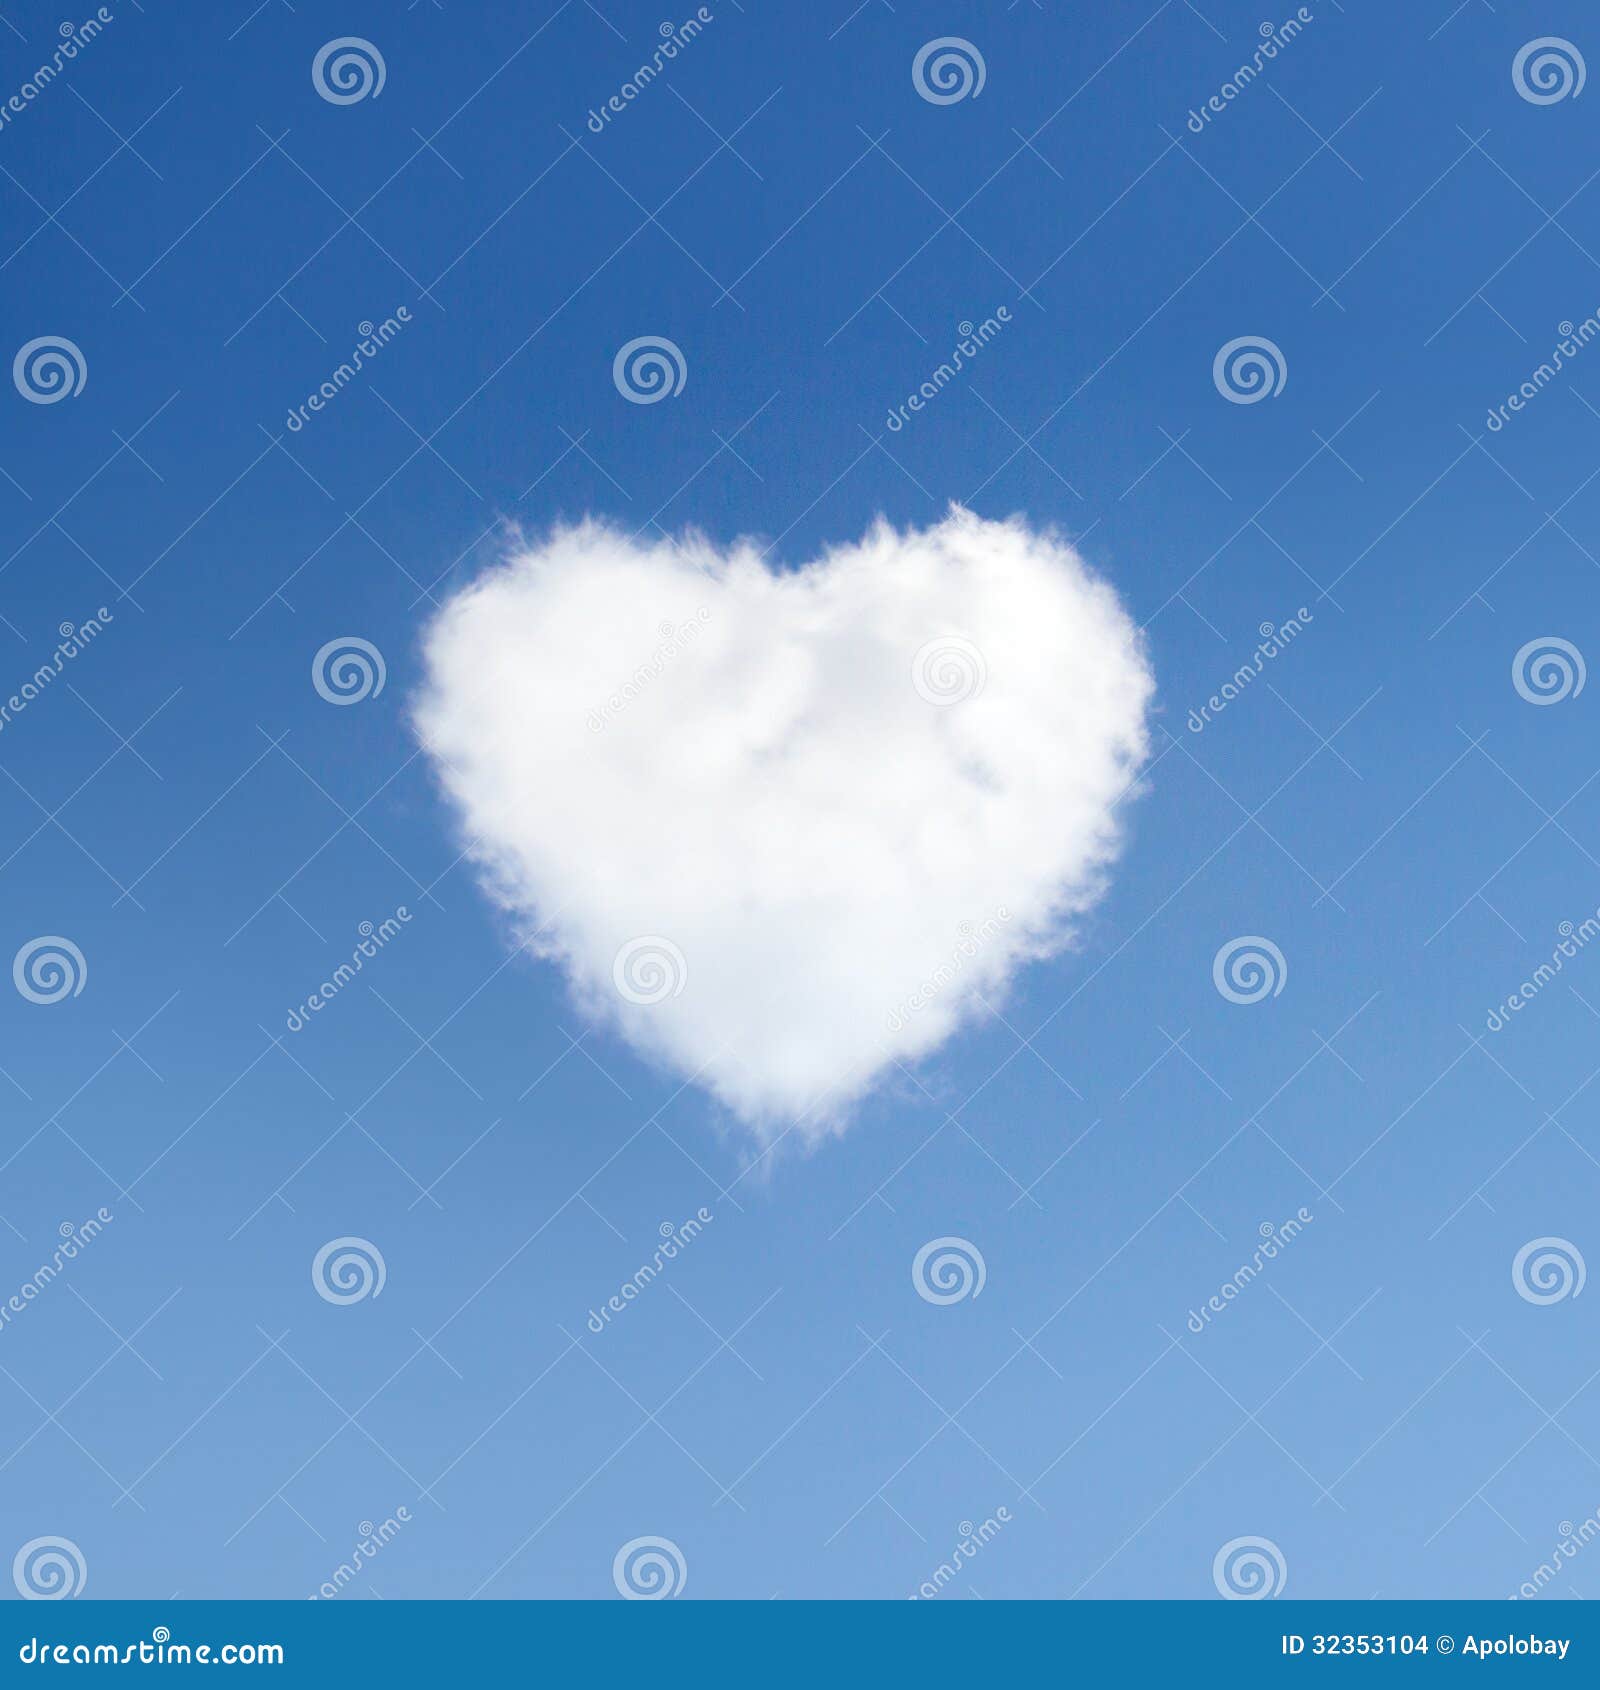 Heart of Clouds Symbol of Love on Background of Blue Sky Stock Photo -  Image of marriage, flying: 32353104